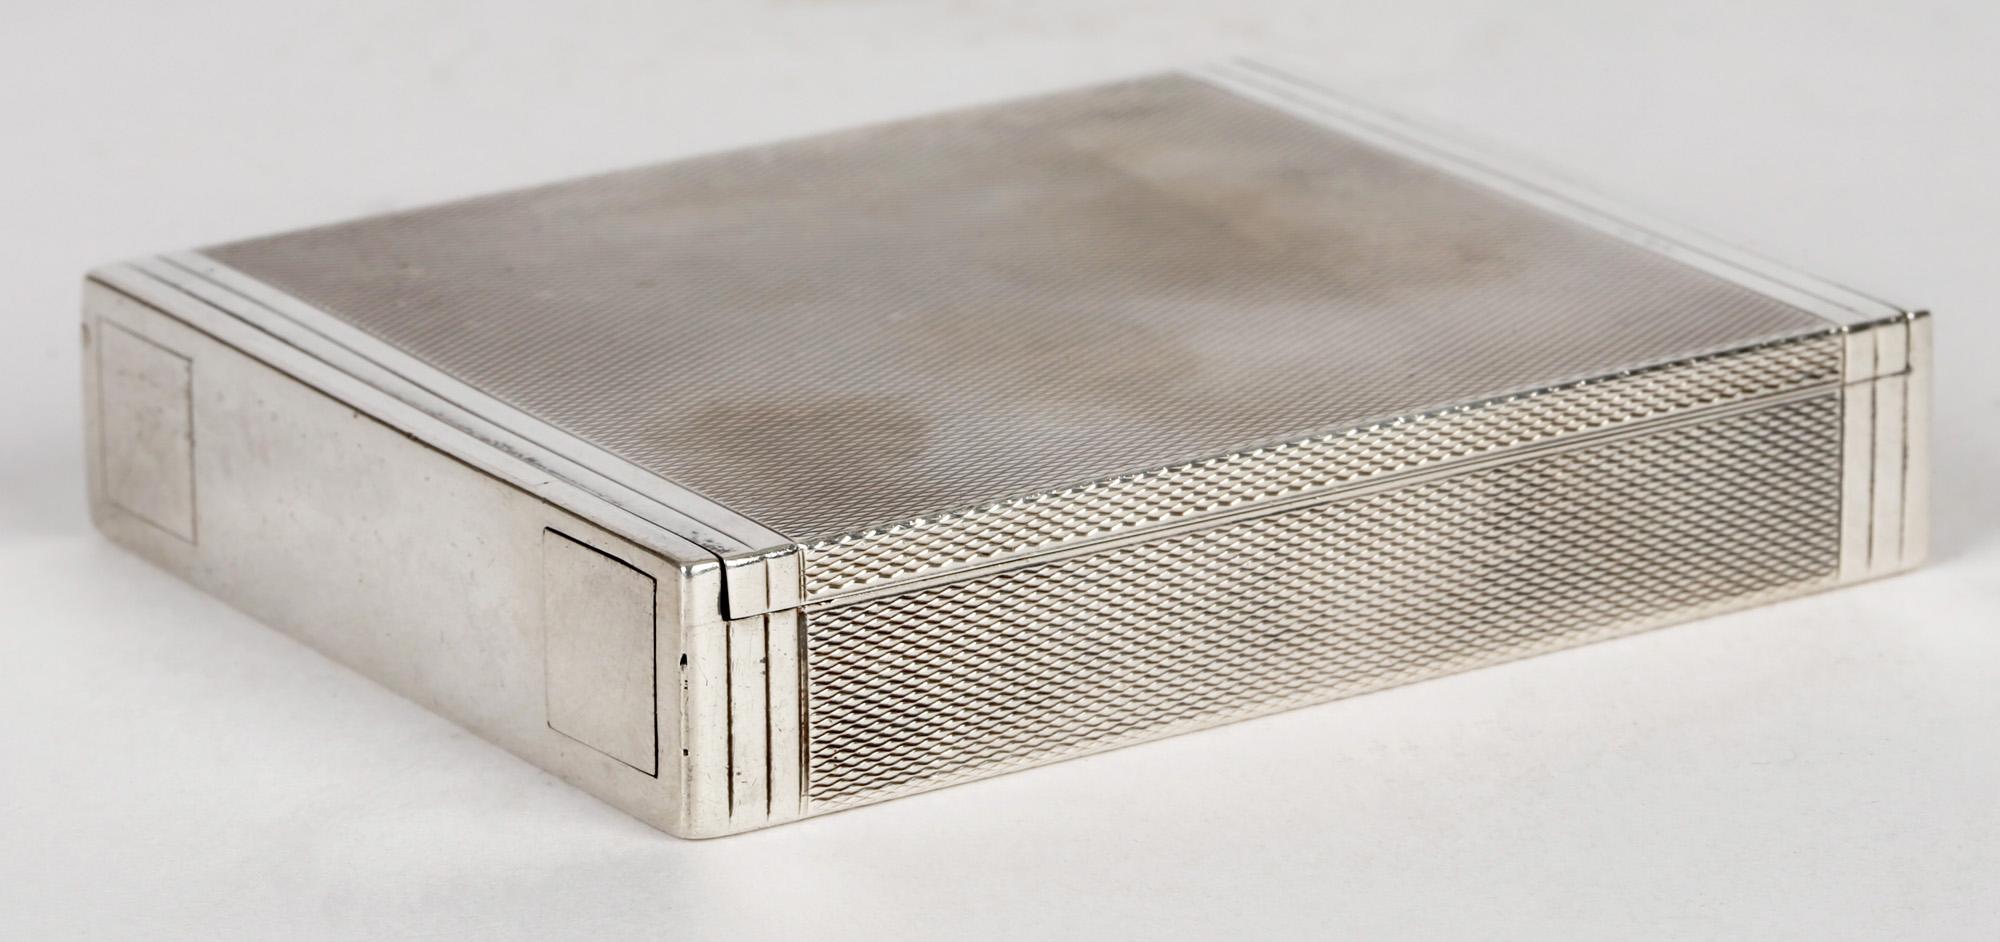 Cartier London Art Deco Silver Cigarette or Card Case with Machined Patterning 1